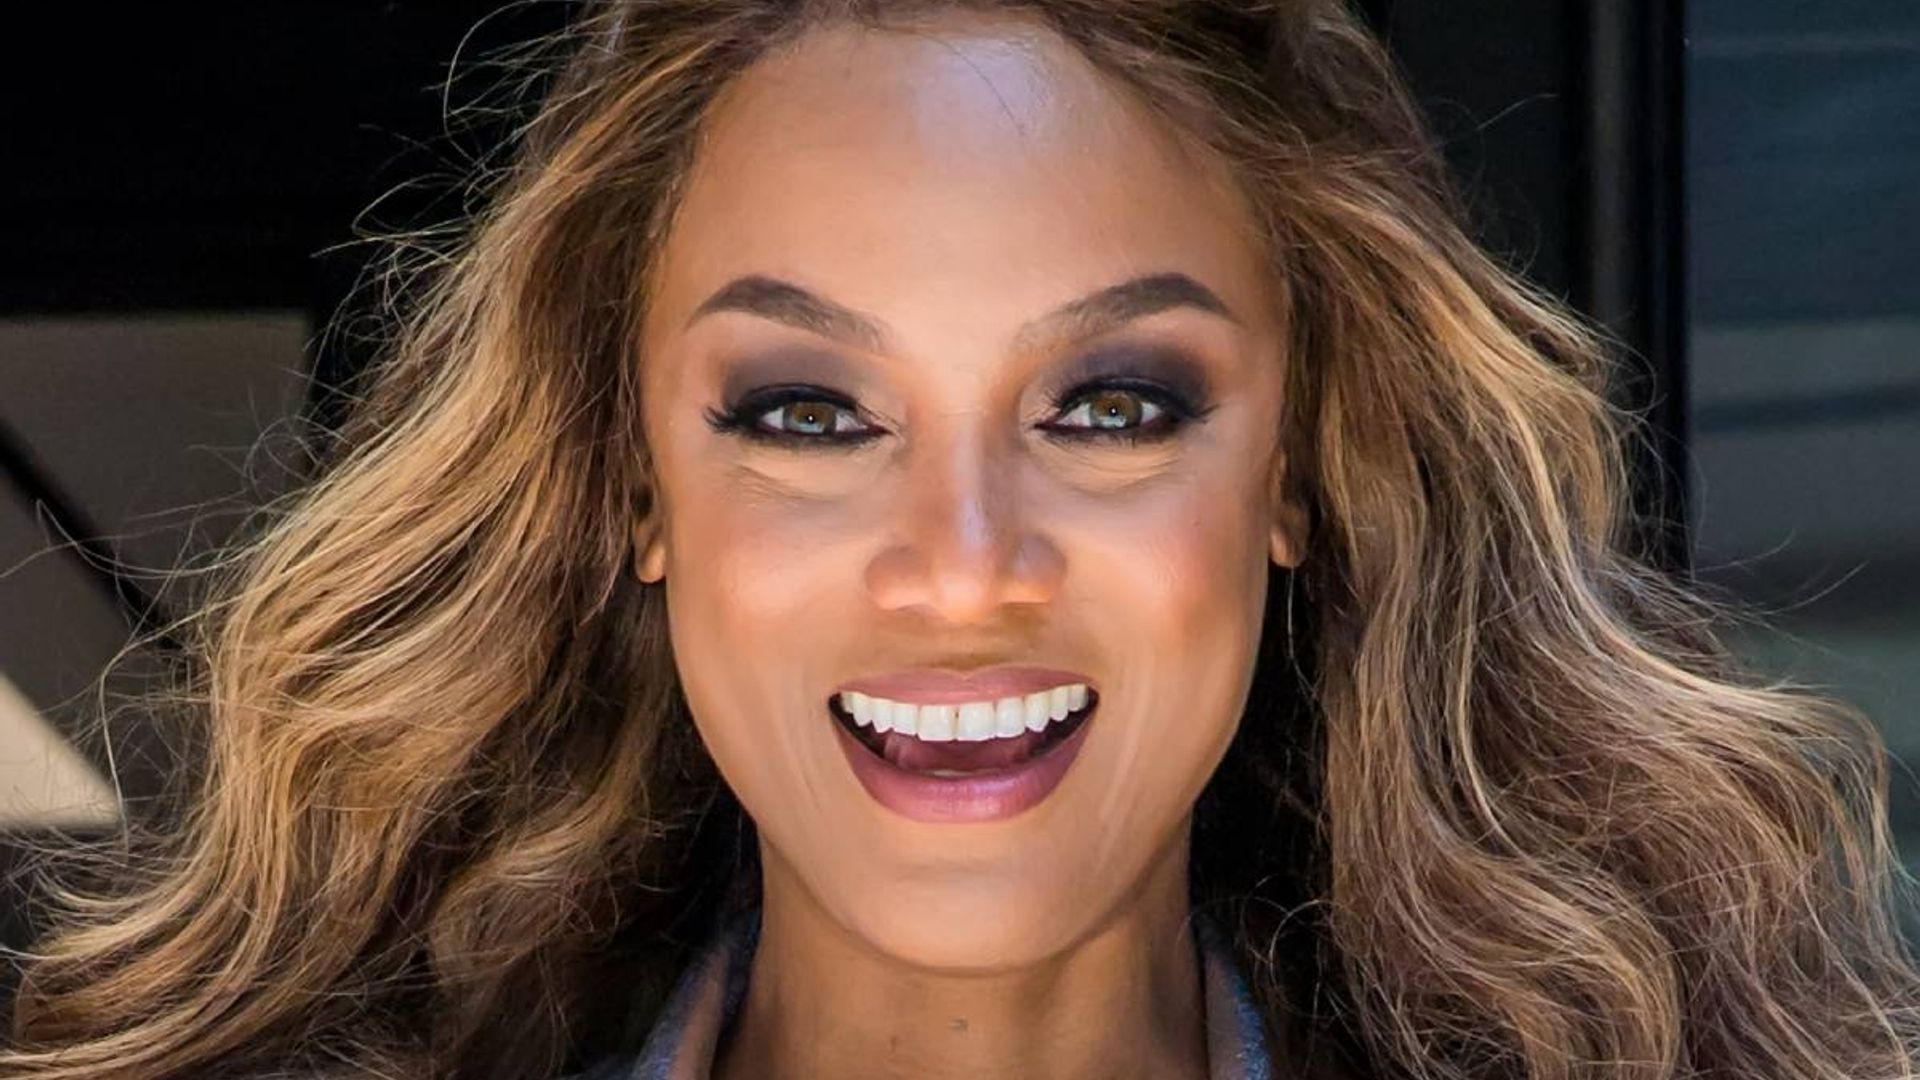 tyra banks physique stuns fans